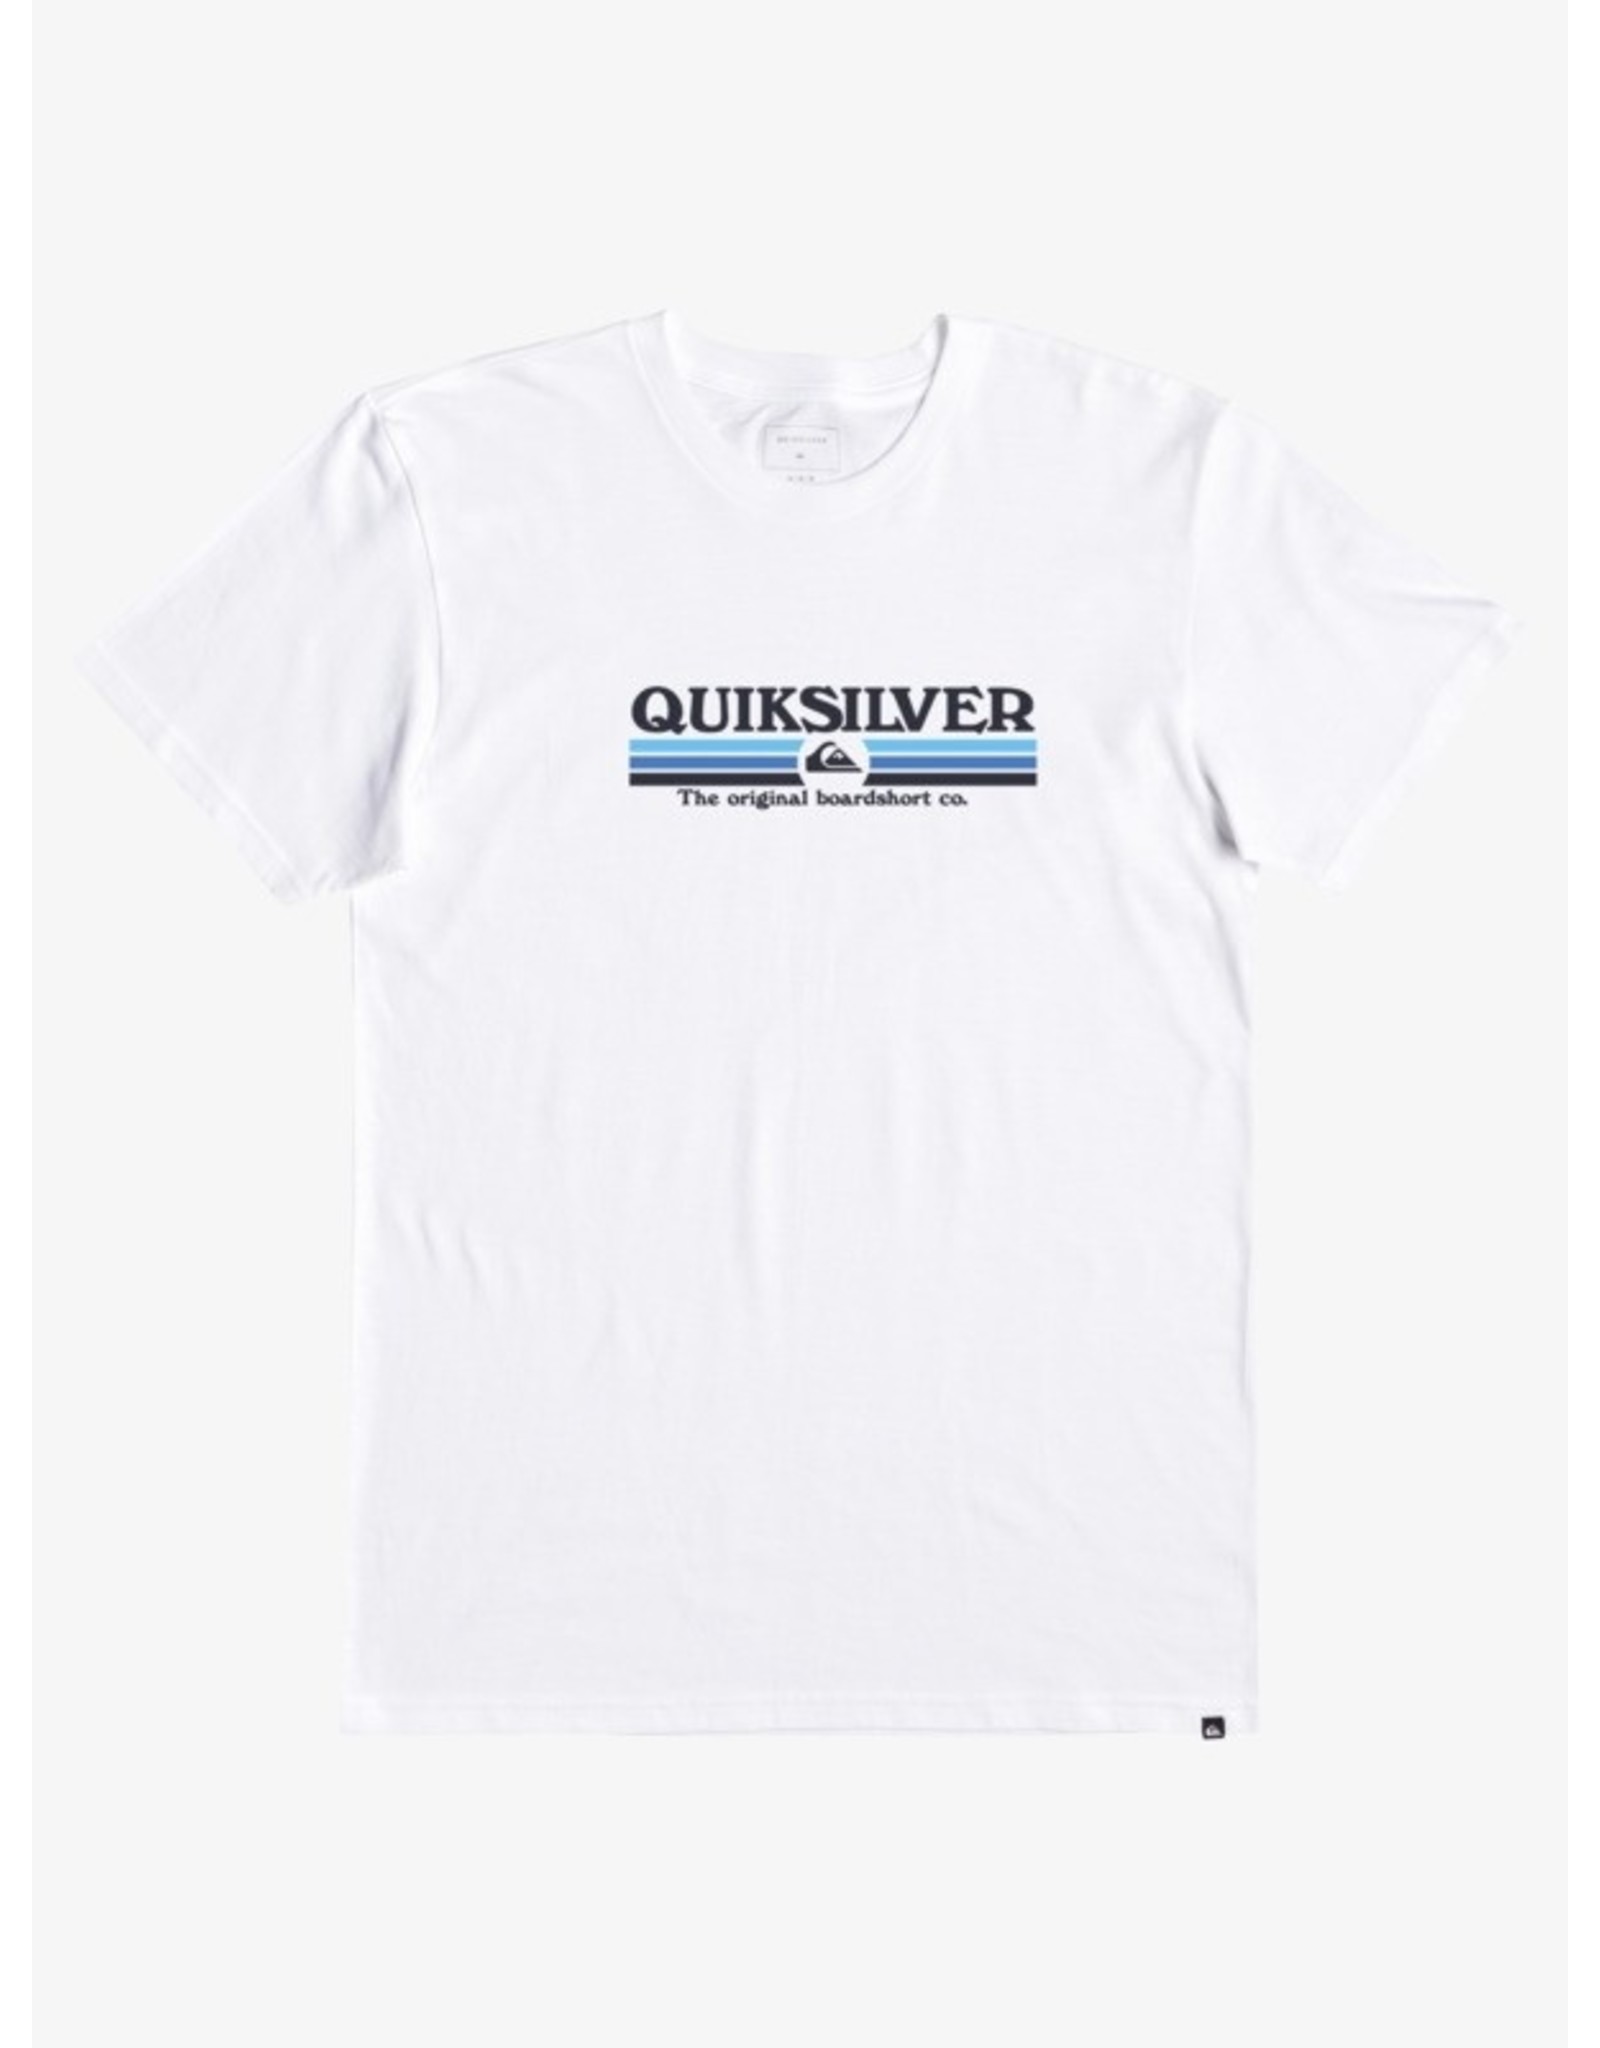 Quiksilver Lined Up Tank